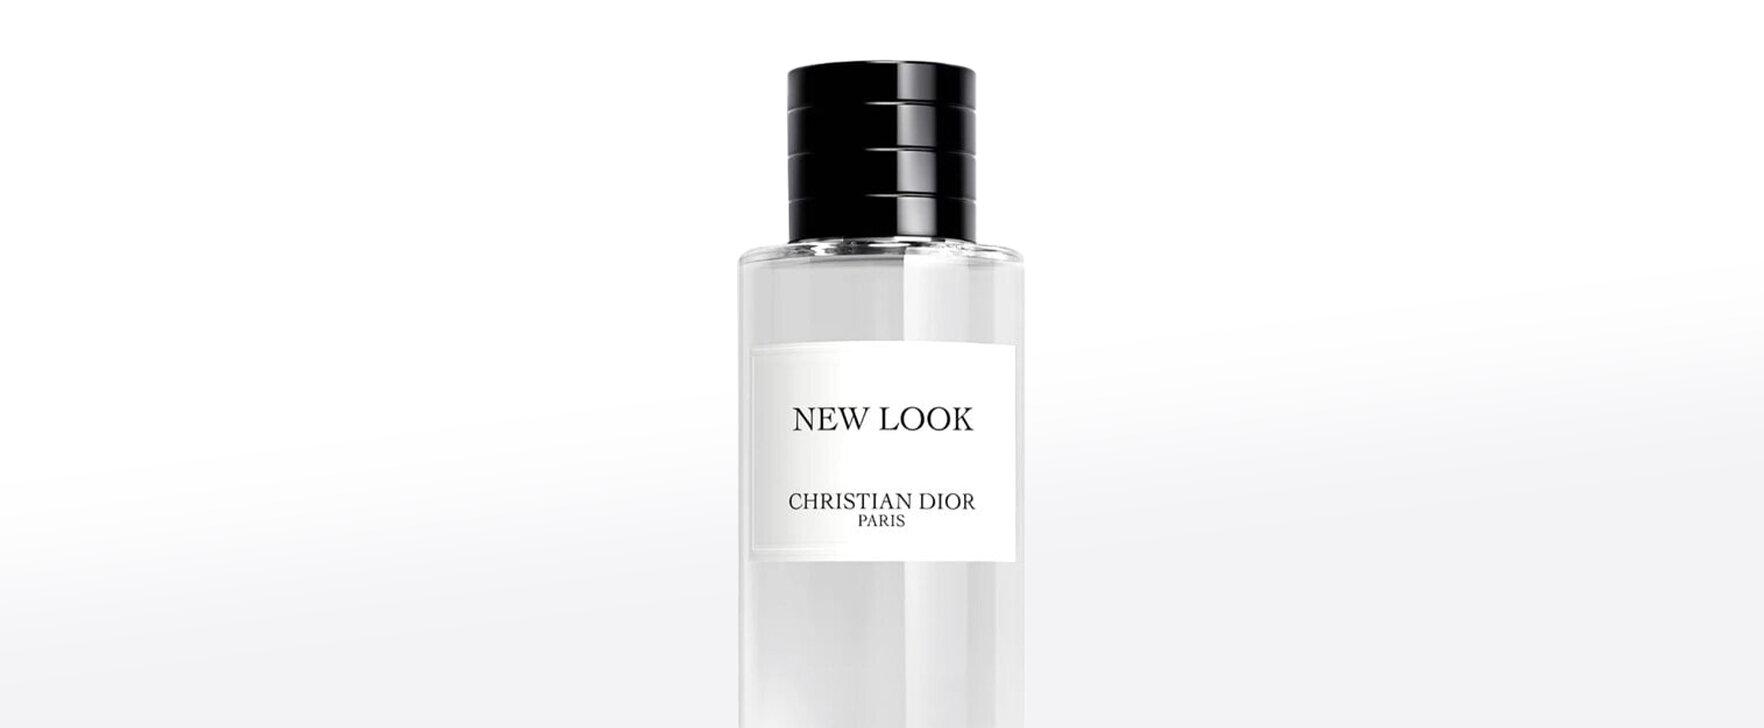 An Ode to the Rebirth of Fashion: The New Eau de Parfum "New Look" by Dior